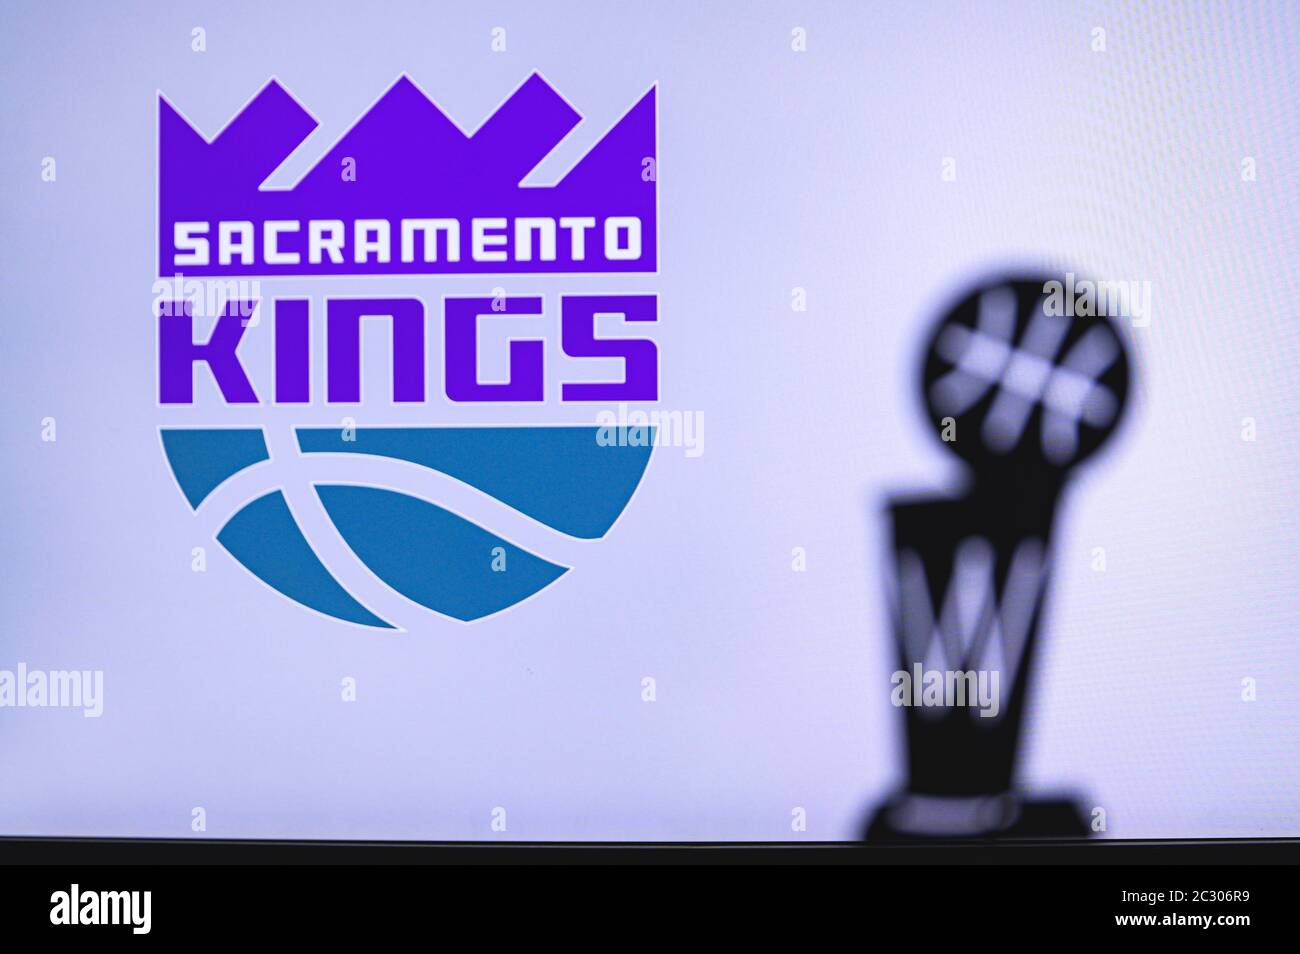 NEW YORK, USA, JUN 18, 2020: Sacramento Kings Basketball club on the white screen. Silhouette of NBA trophy in foreground. Stock Photo